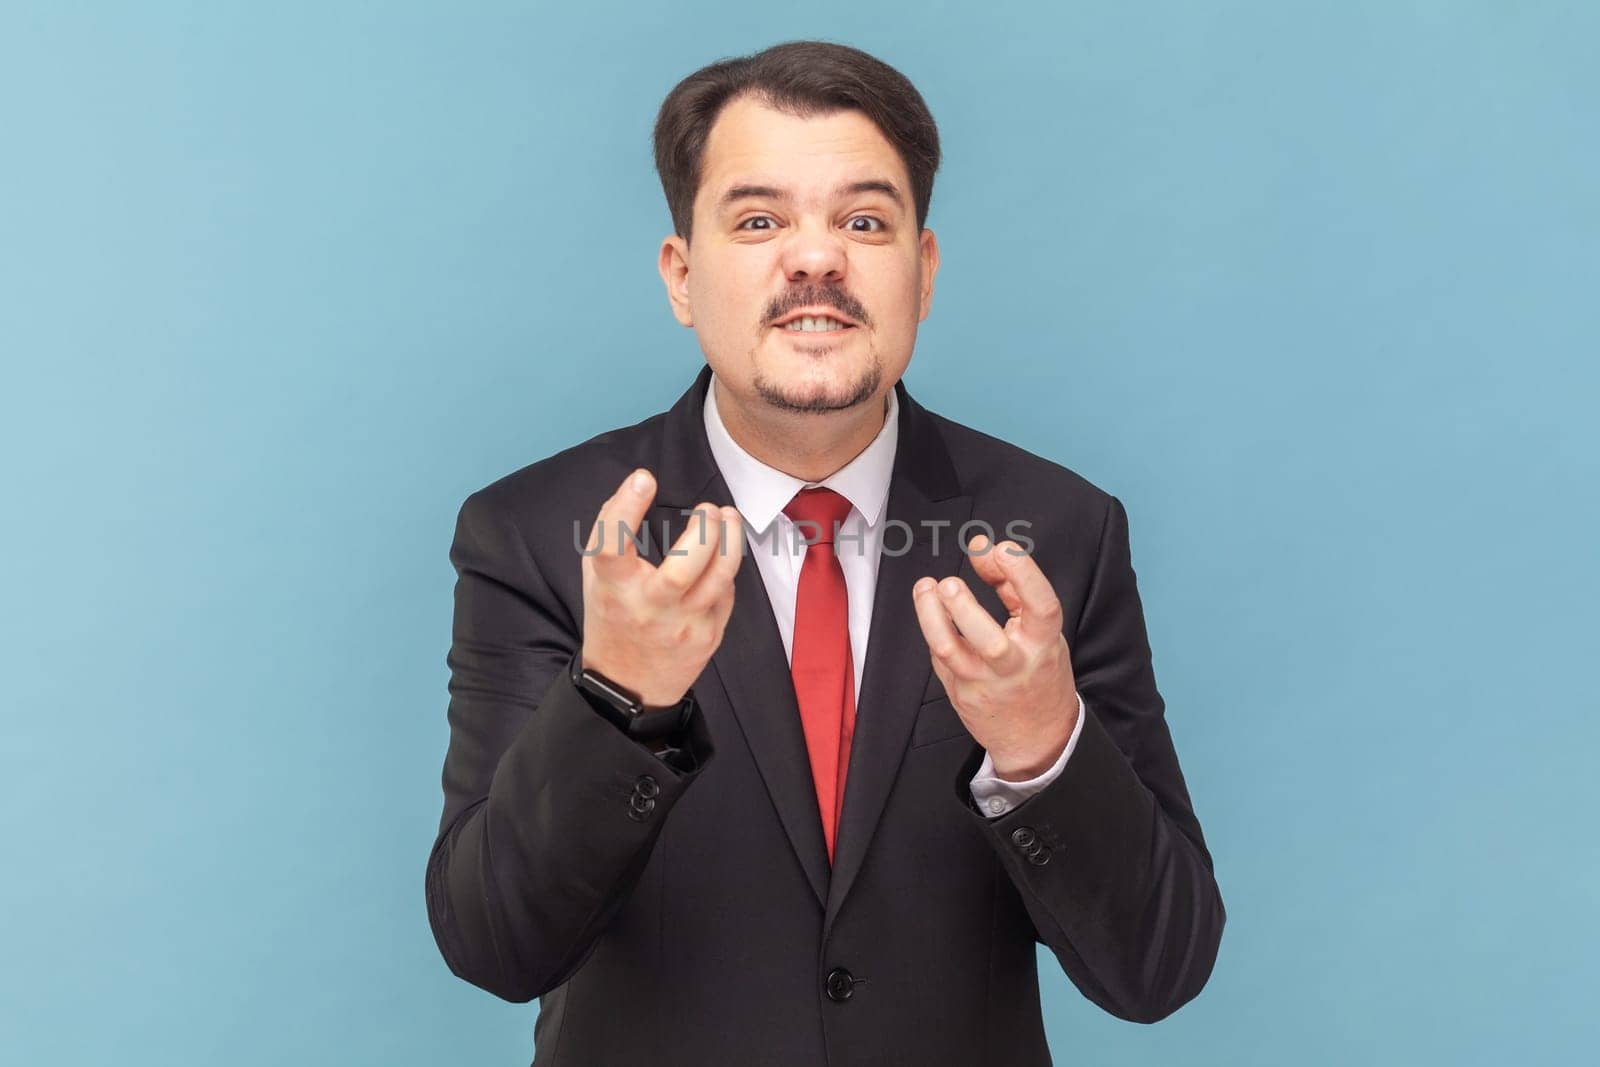 Portrait of angry aggressive man with mustache standing with raised arms, expressing anger and hate, wearing black suit with red tie. Indoor studio shot isolated on light blue background.